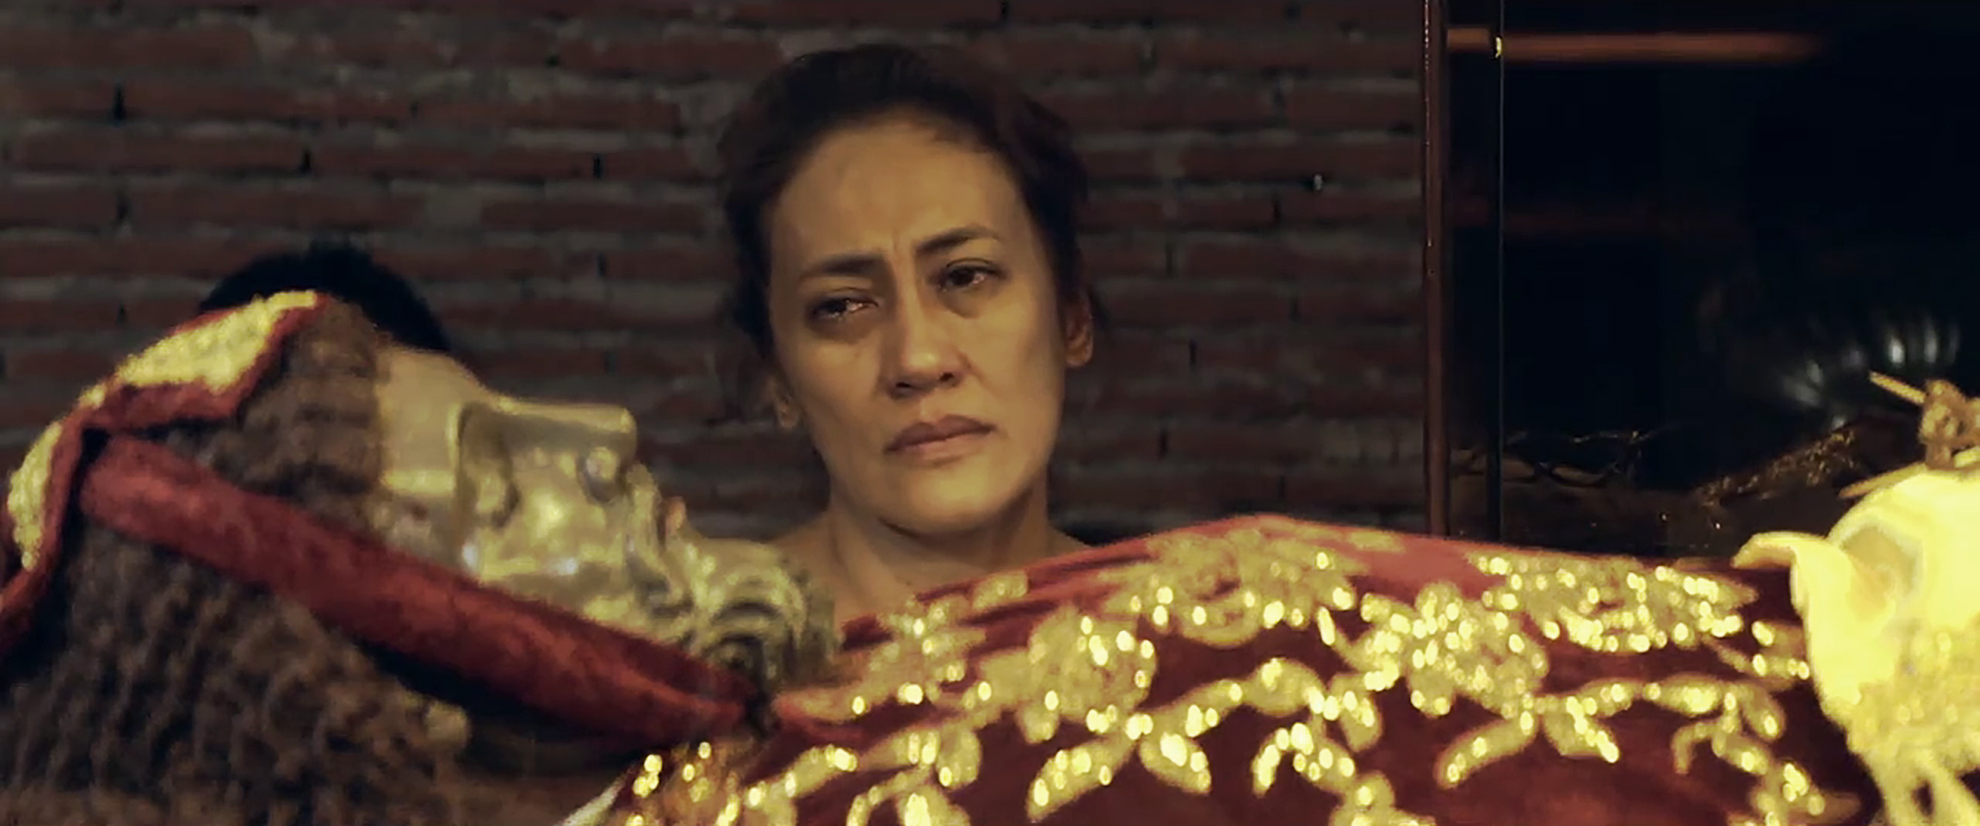 Watch Ai Ai Delas Alas portray an aging prostitute in trailer for ‘Area’